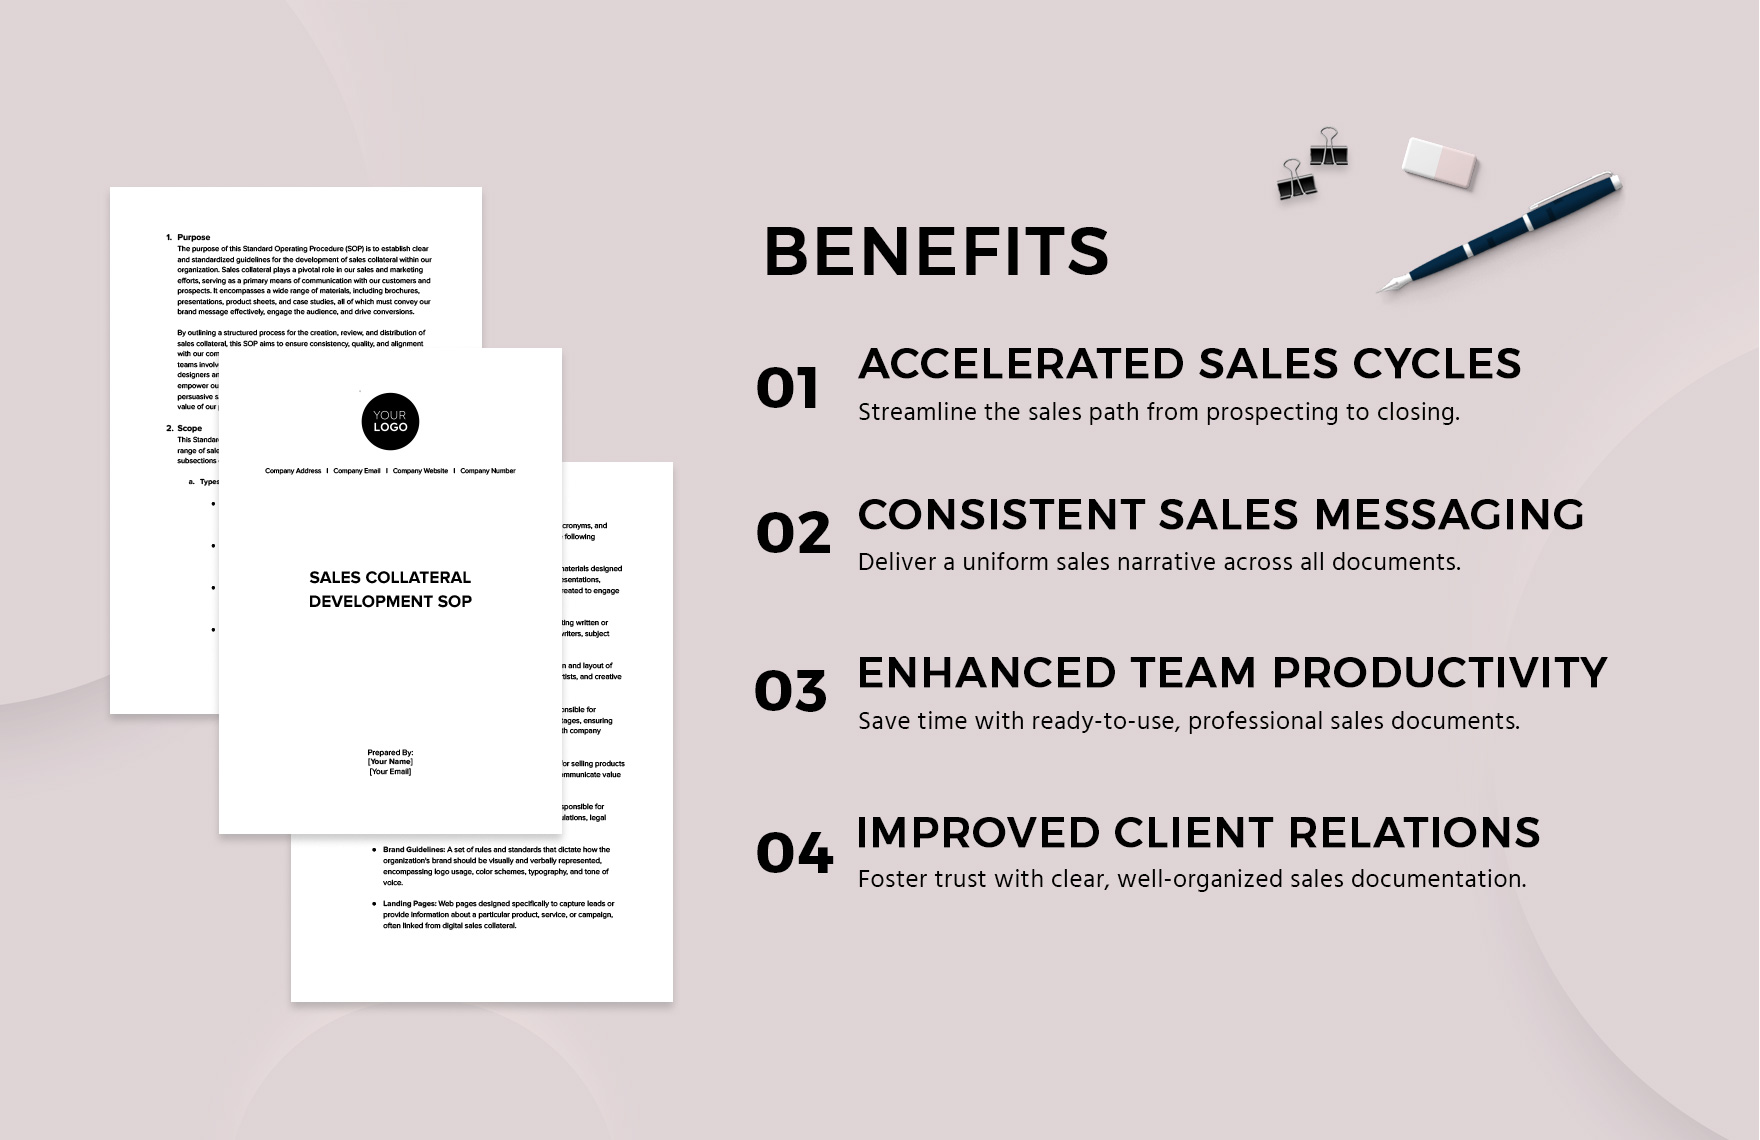 Sales Collateral Development SOP Template